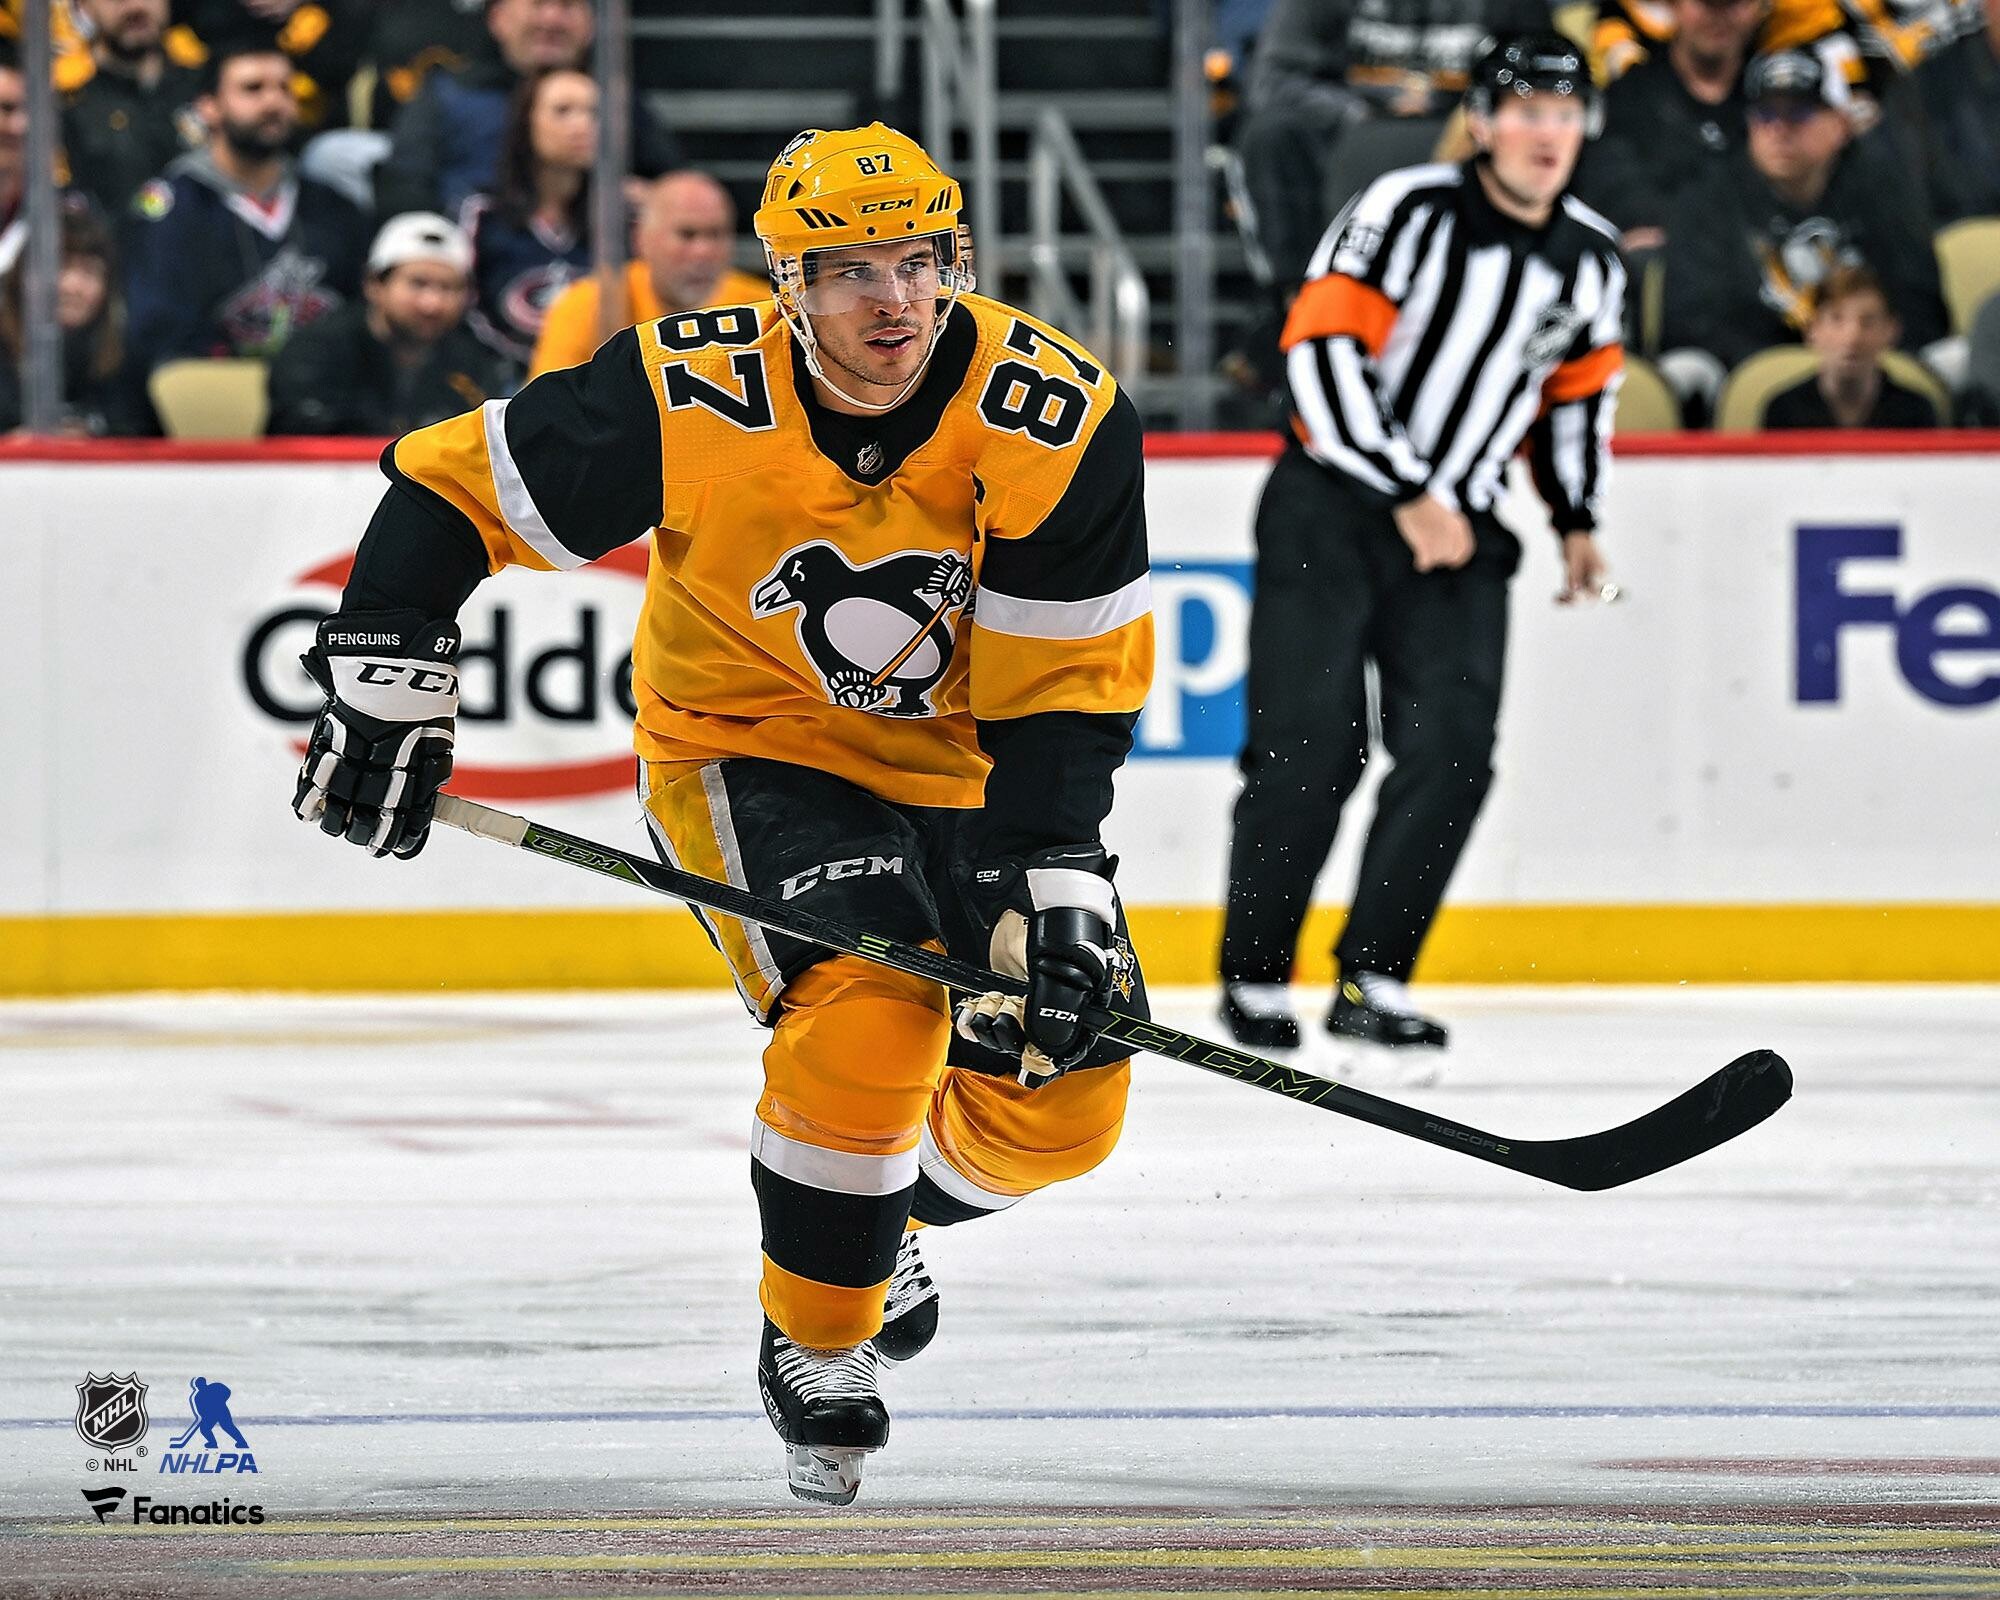 Wallpapers Sports - Leisures > Wallpapers Hockey Sidney Crosby by frankfou  - Hebus.com